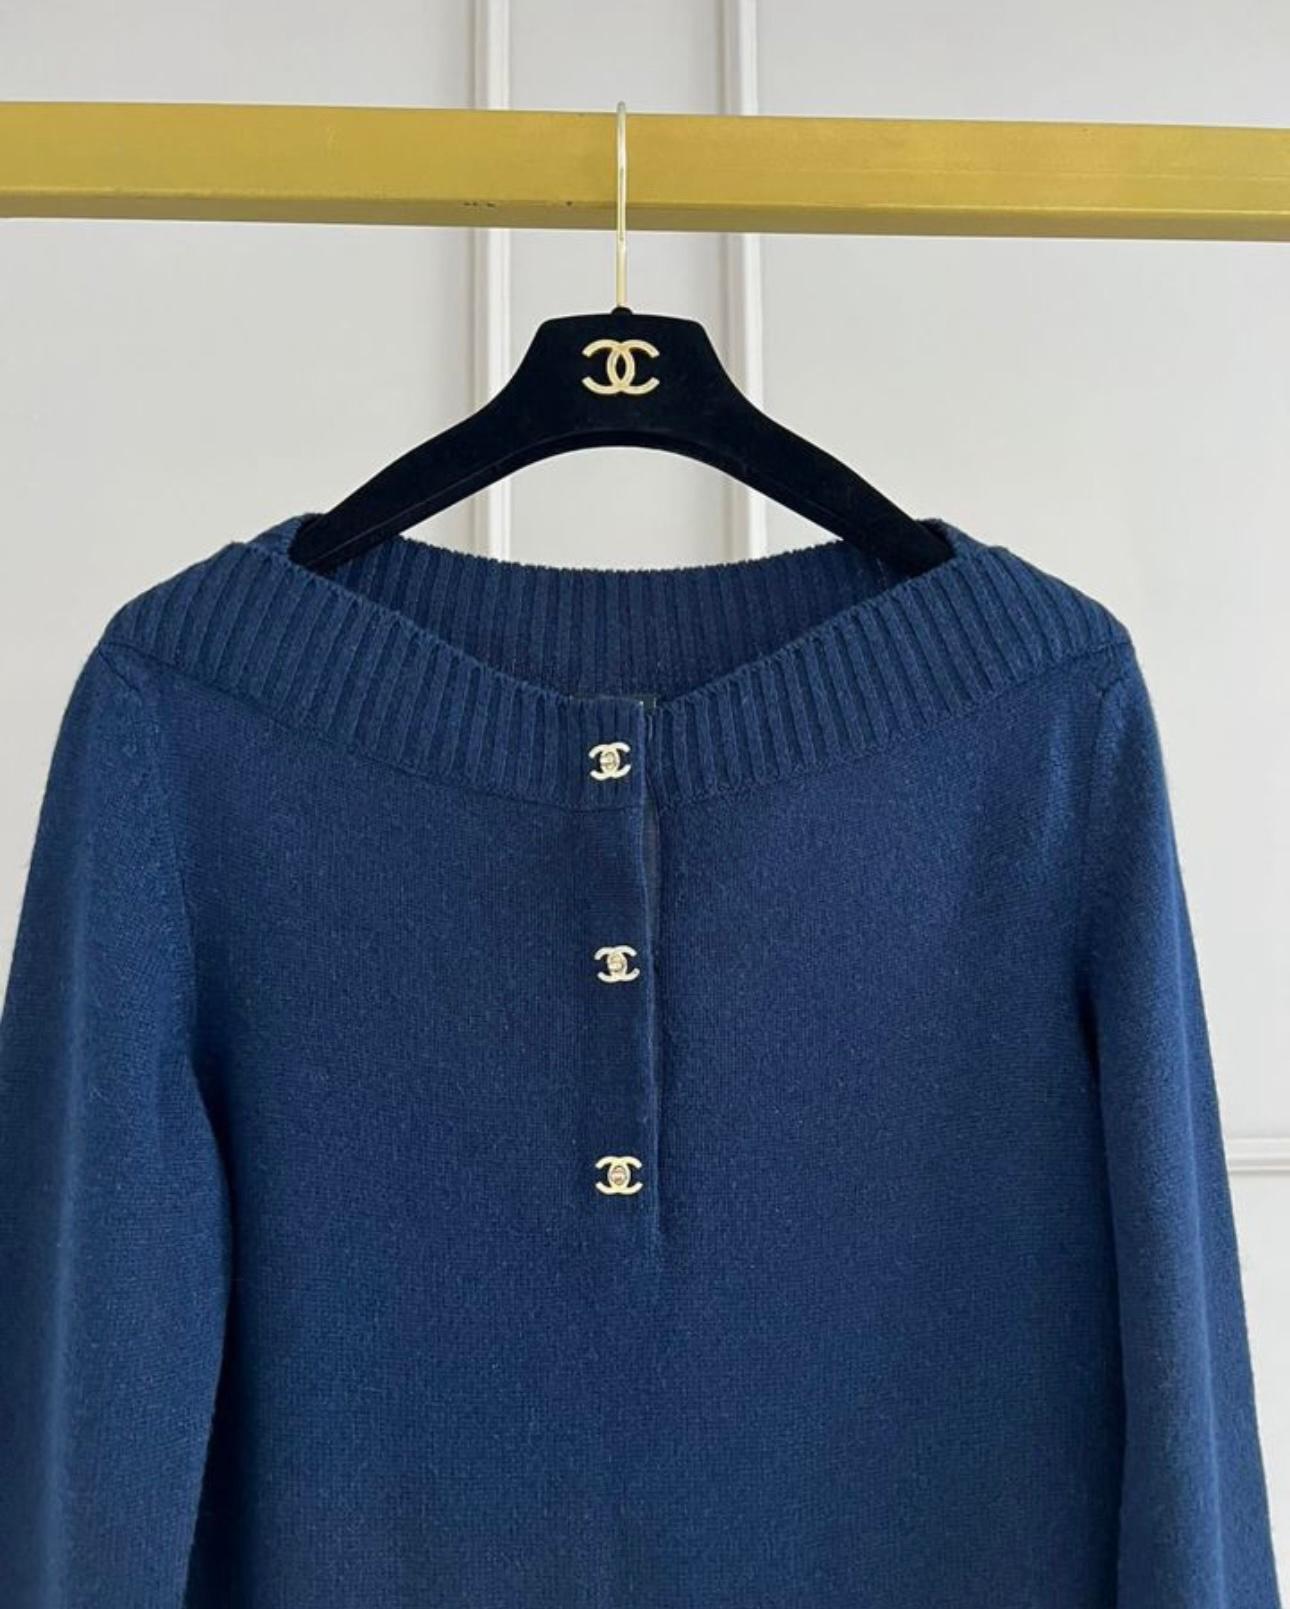 Iconic Chanel navy cashmere dress with CC turnlock closures!
Size mark 38 FR. Kept unworn, condition is pristine.